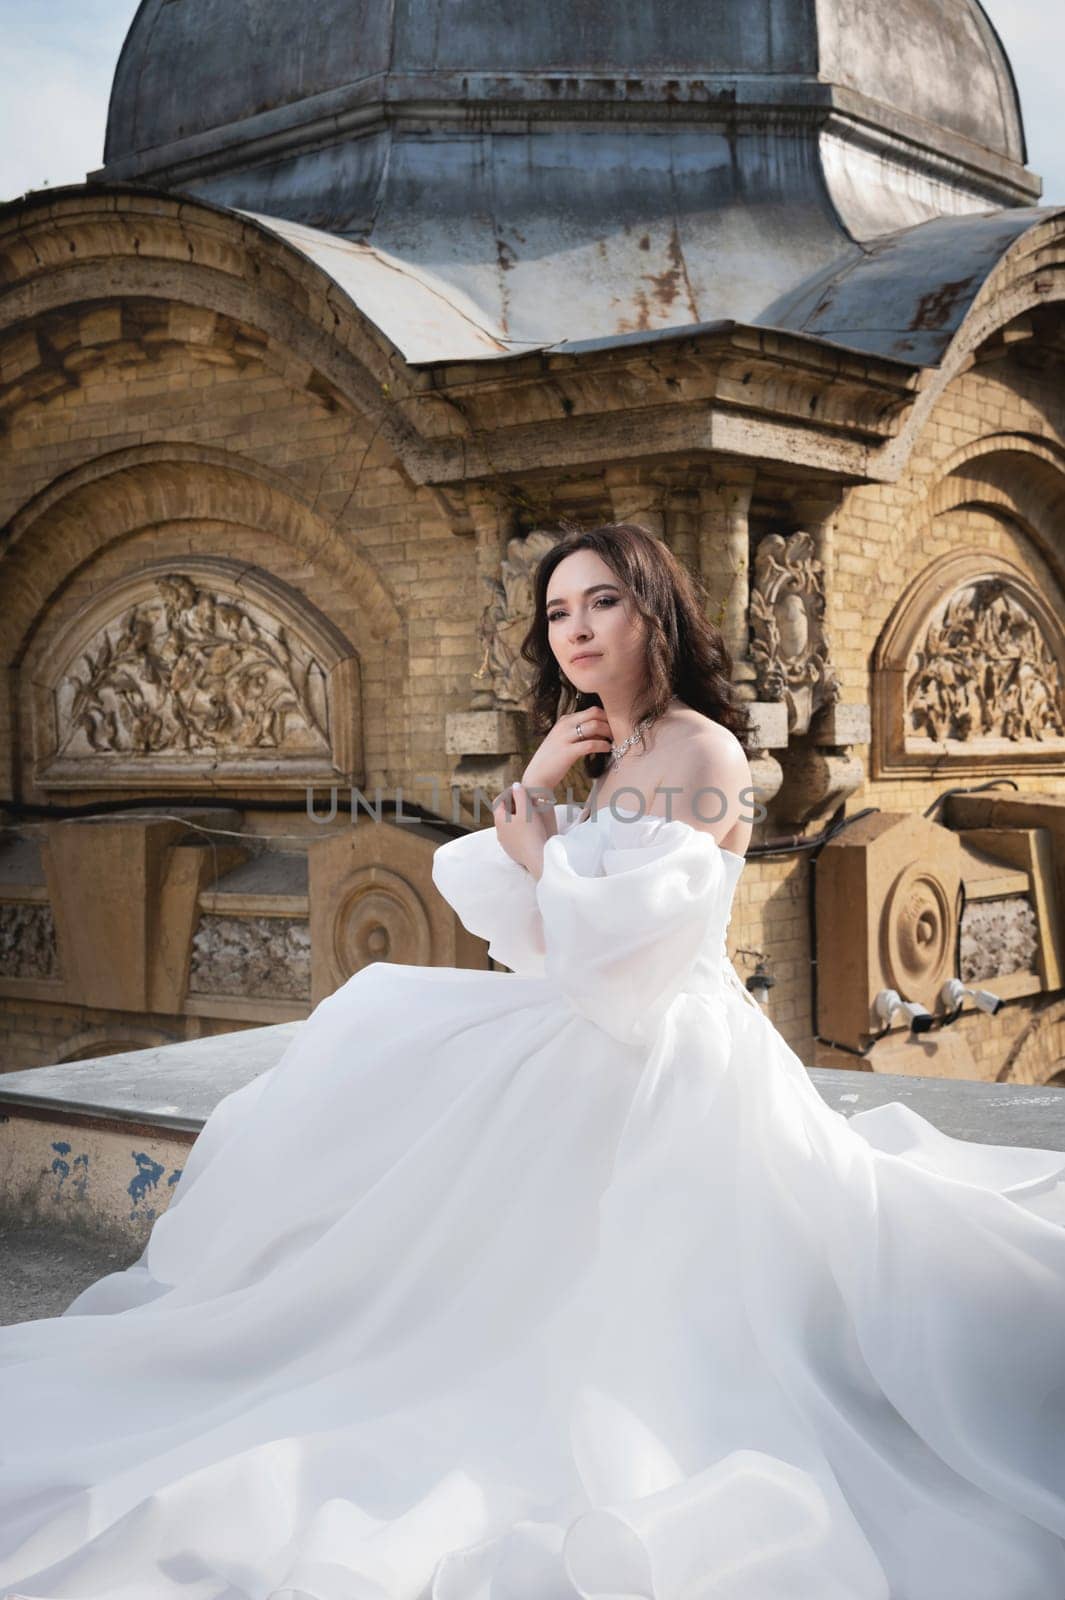 A bride in a white dress sits on a ledge with an old building in the background. Young Caucasian woman straightens her hair at a wedding in an ancient city.